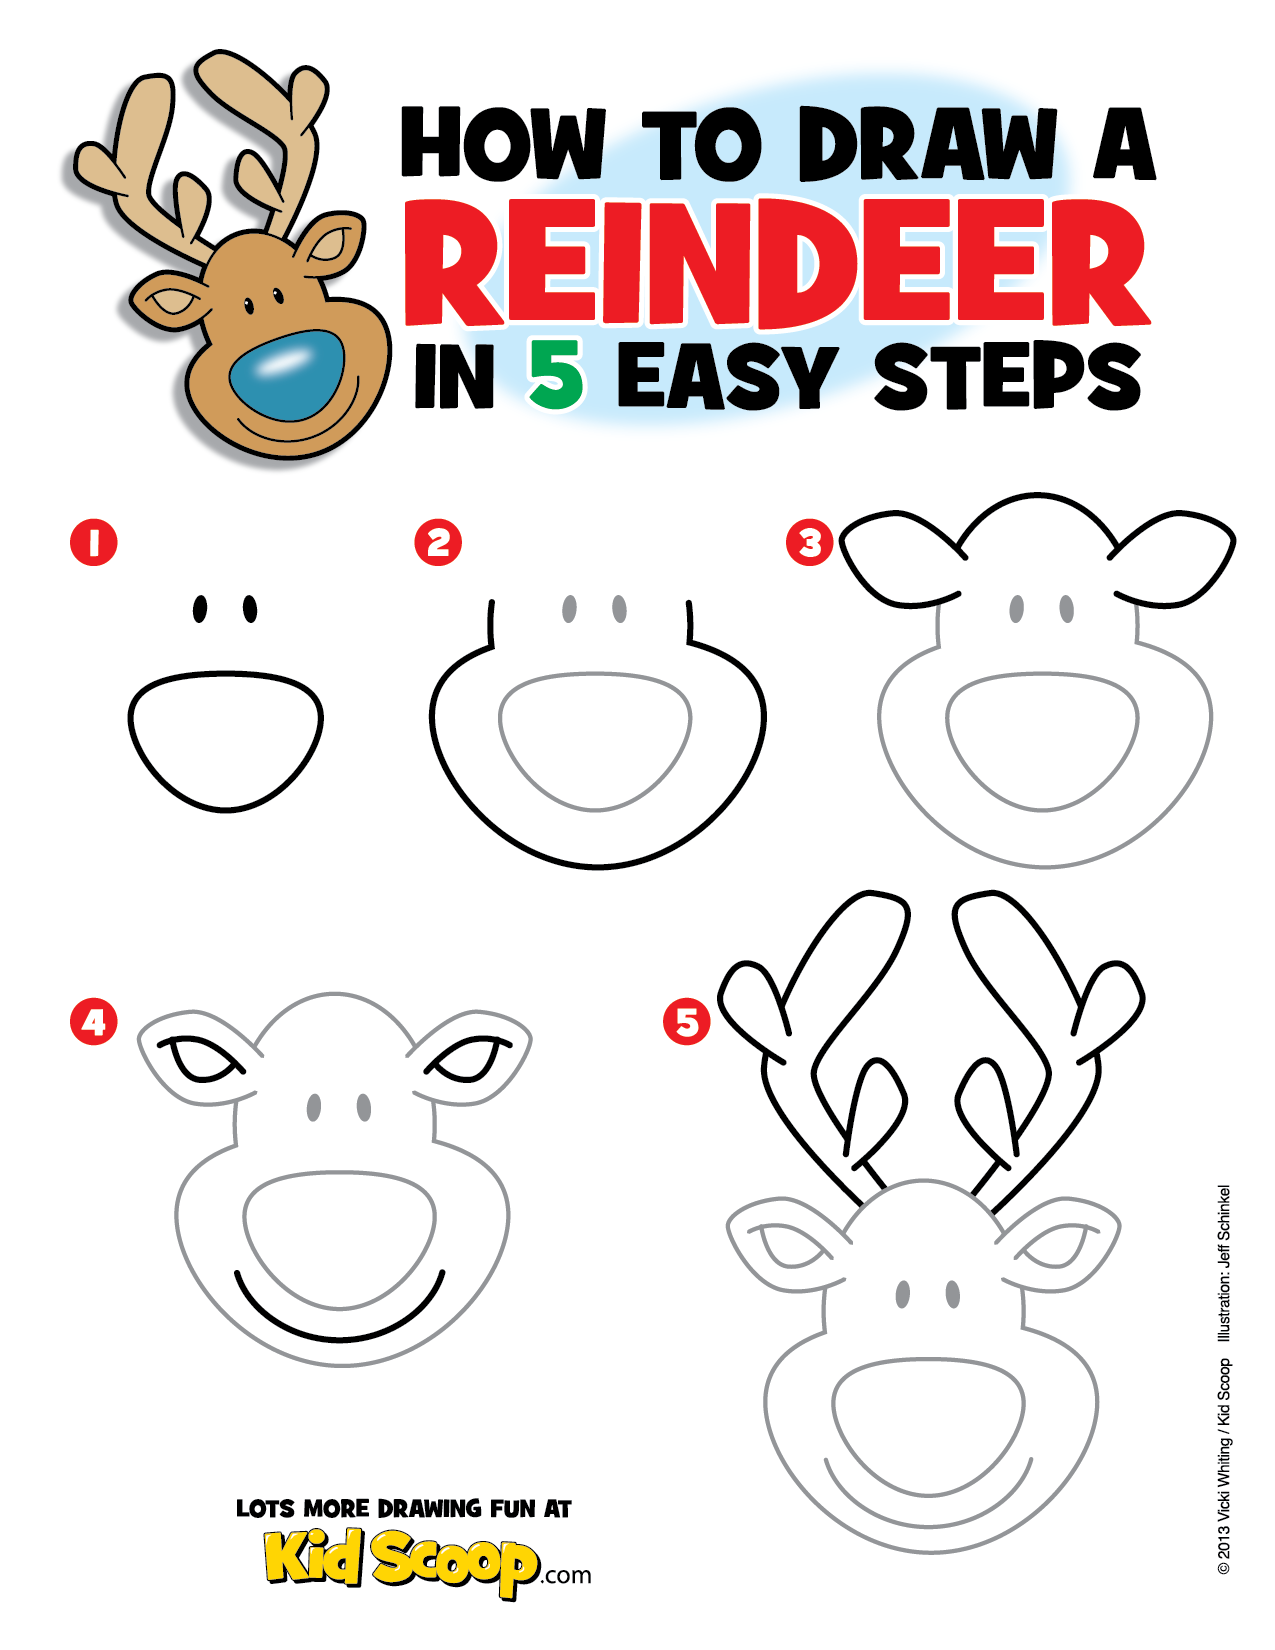 Use This Step By Step Guide With Your Child Or Students And Learn How To Draw A Reindeer Www Kidscoop Com Christmas Drawing Christmas Art Christmas Doodles